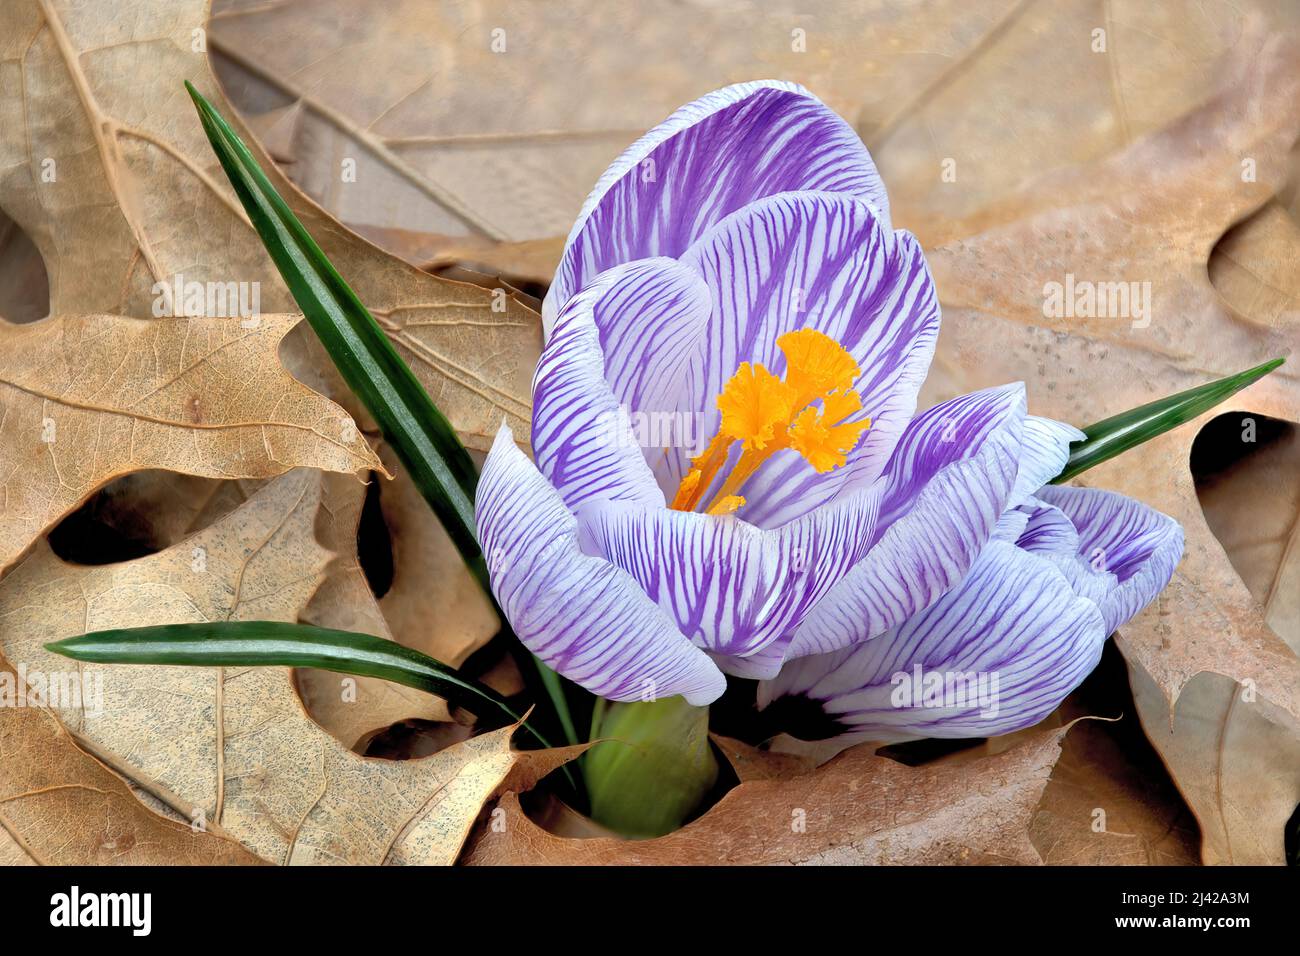 Harbinger of spring. Closeup of crocus blossom with colorful white and purple striped petals and yellow stigmata flowering above carpet of oak leaves. Stock Photo